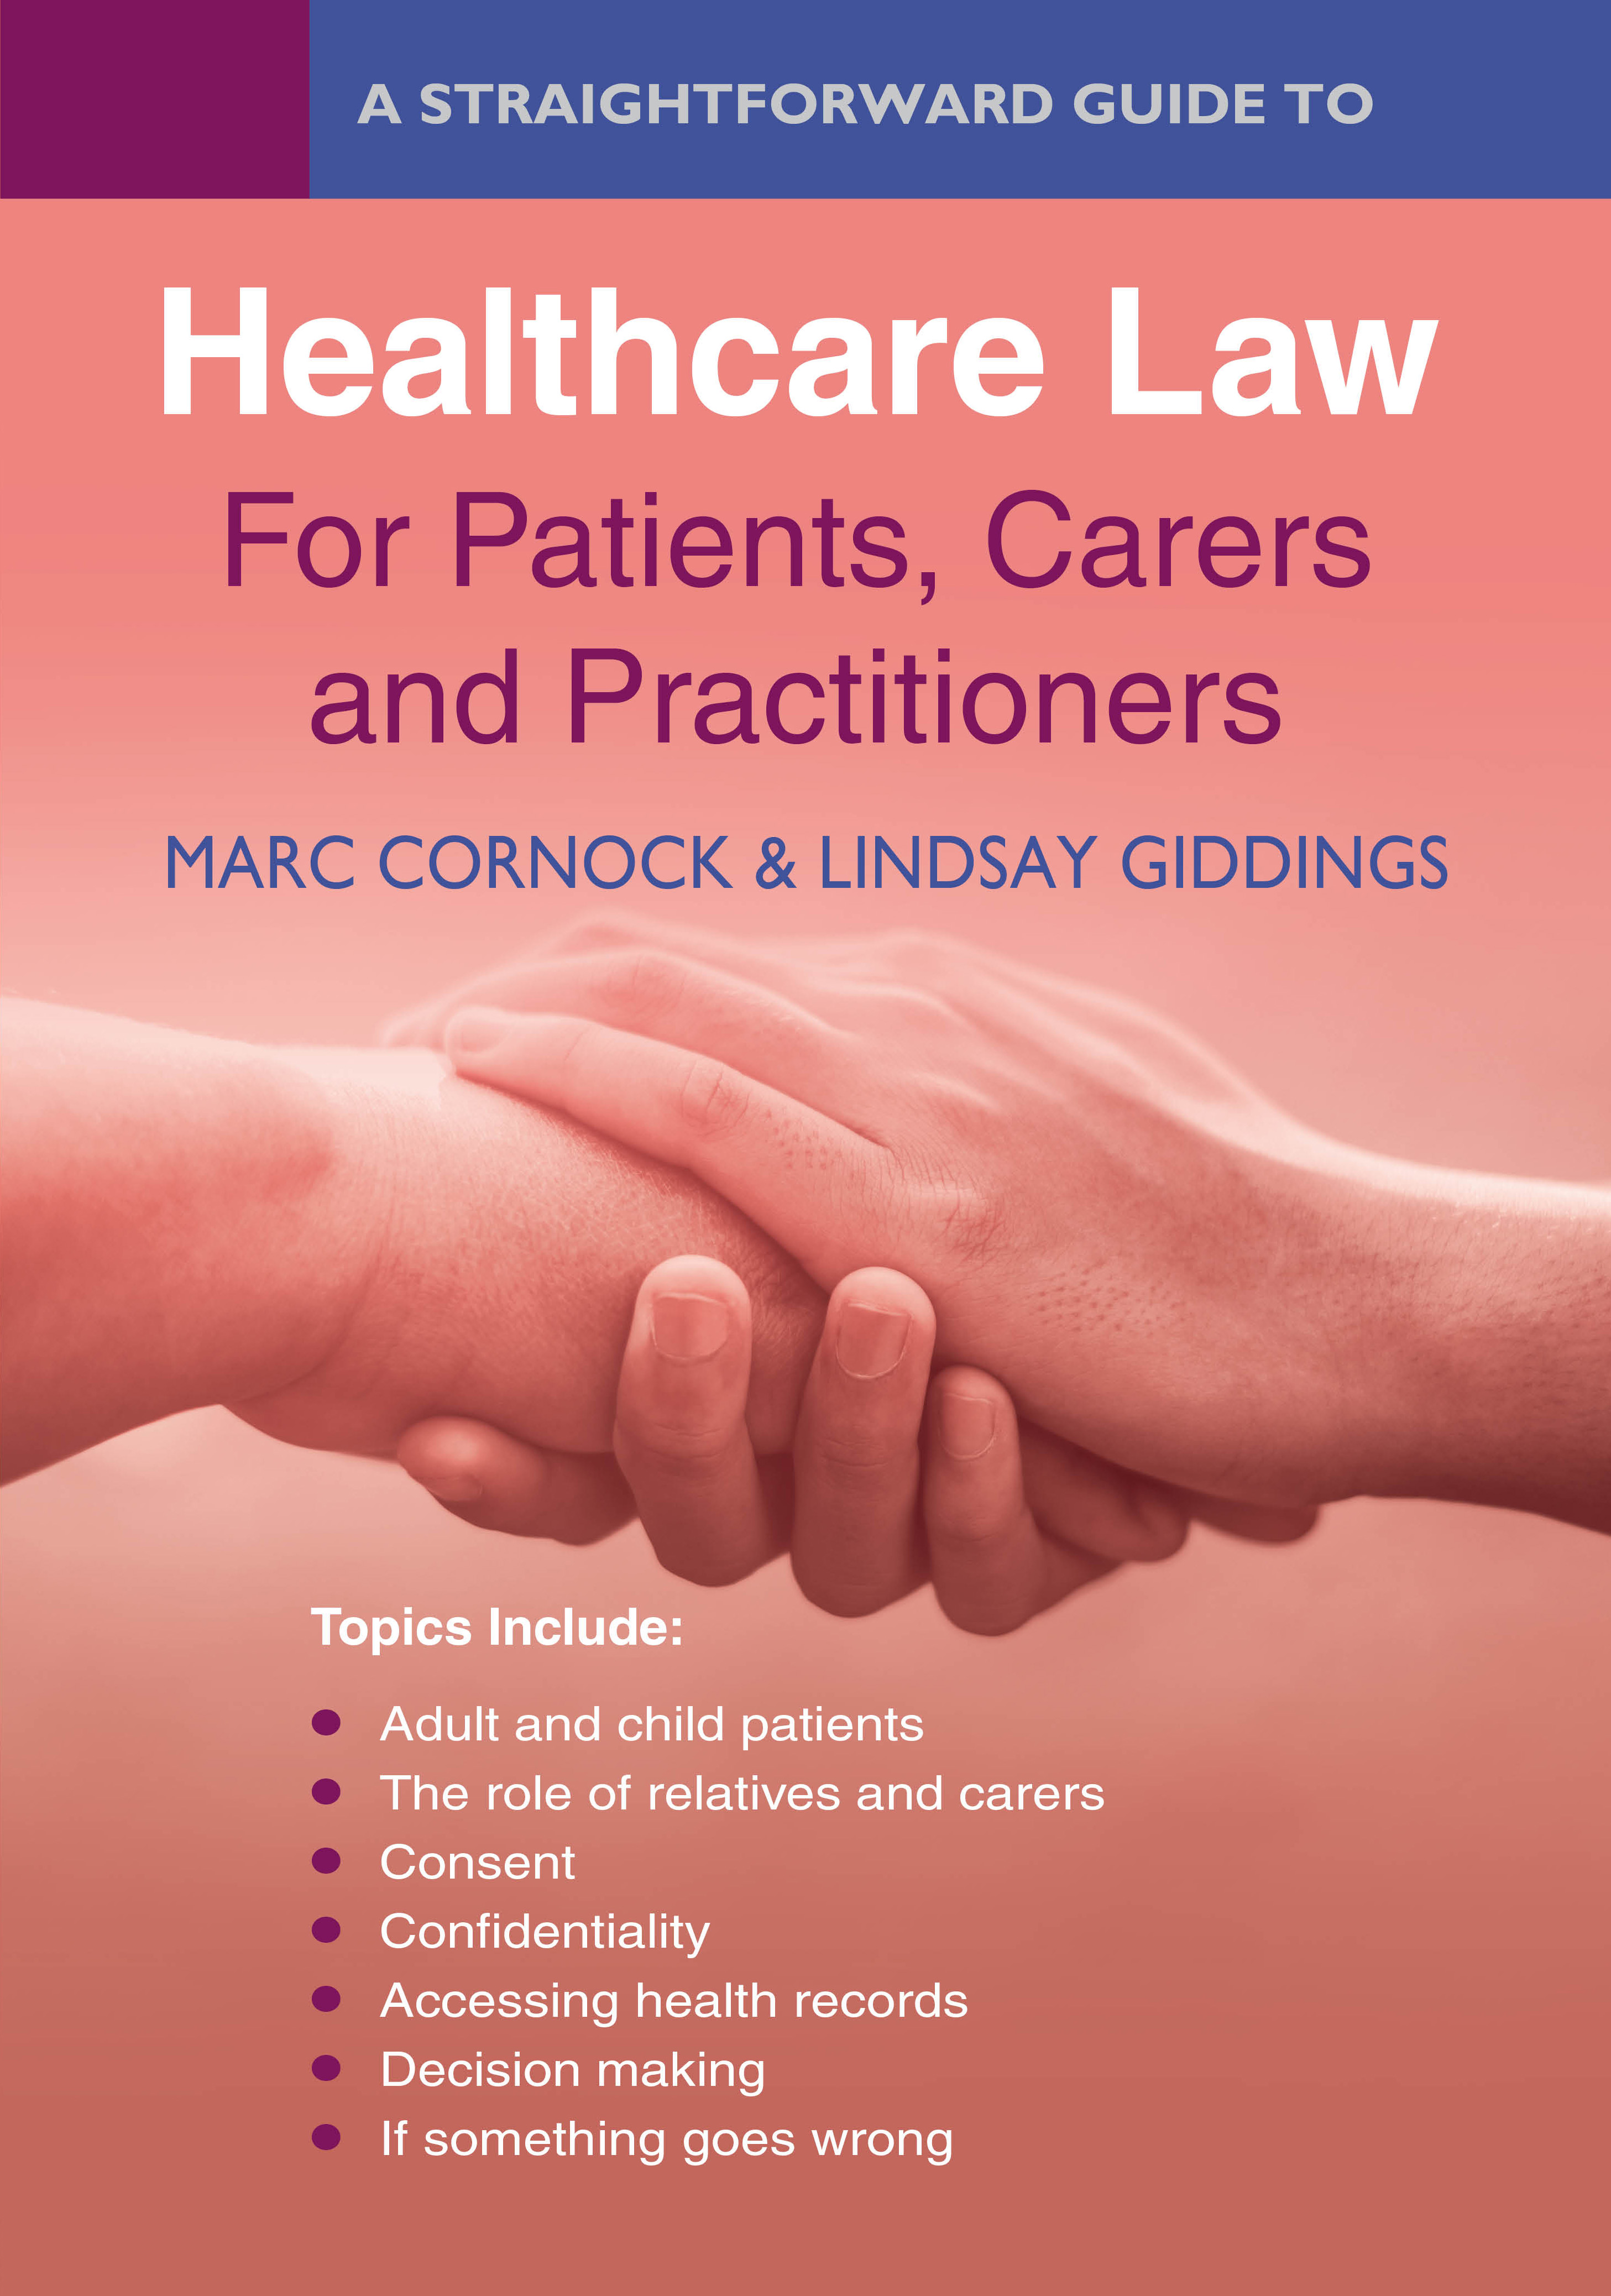 COMPREHENSIVE GUIDE TO HEALTHCARE RIGHTS OF PATIENTS, CARERS AND